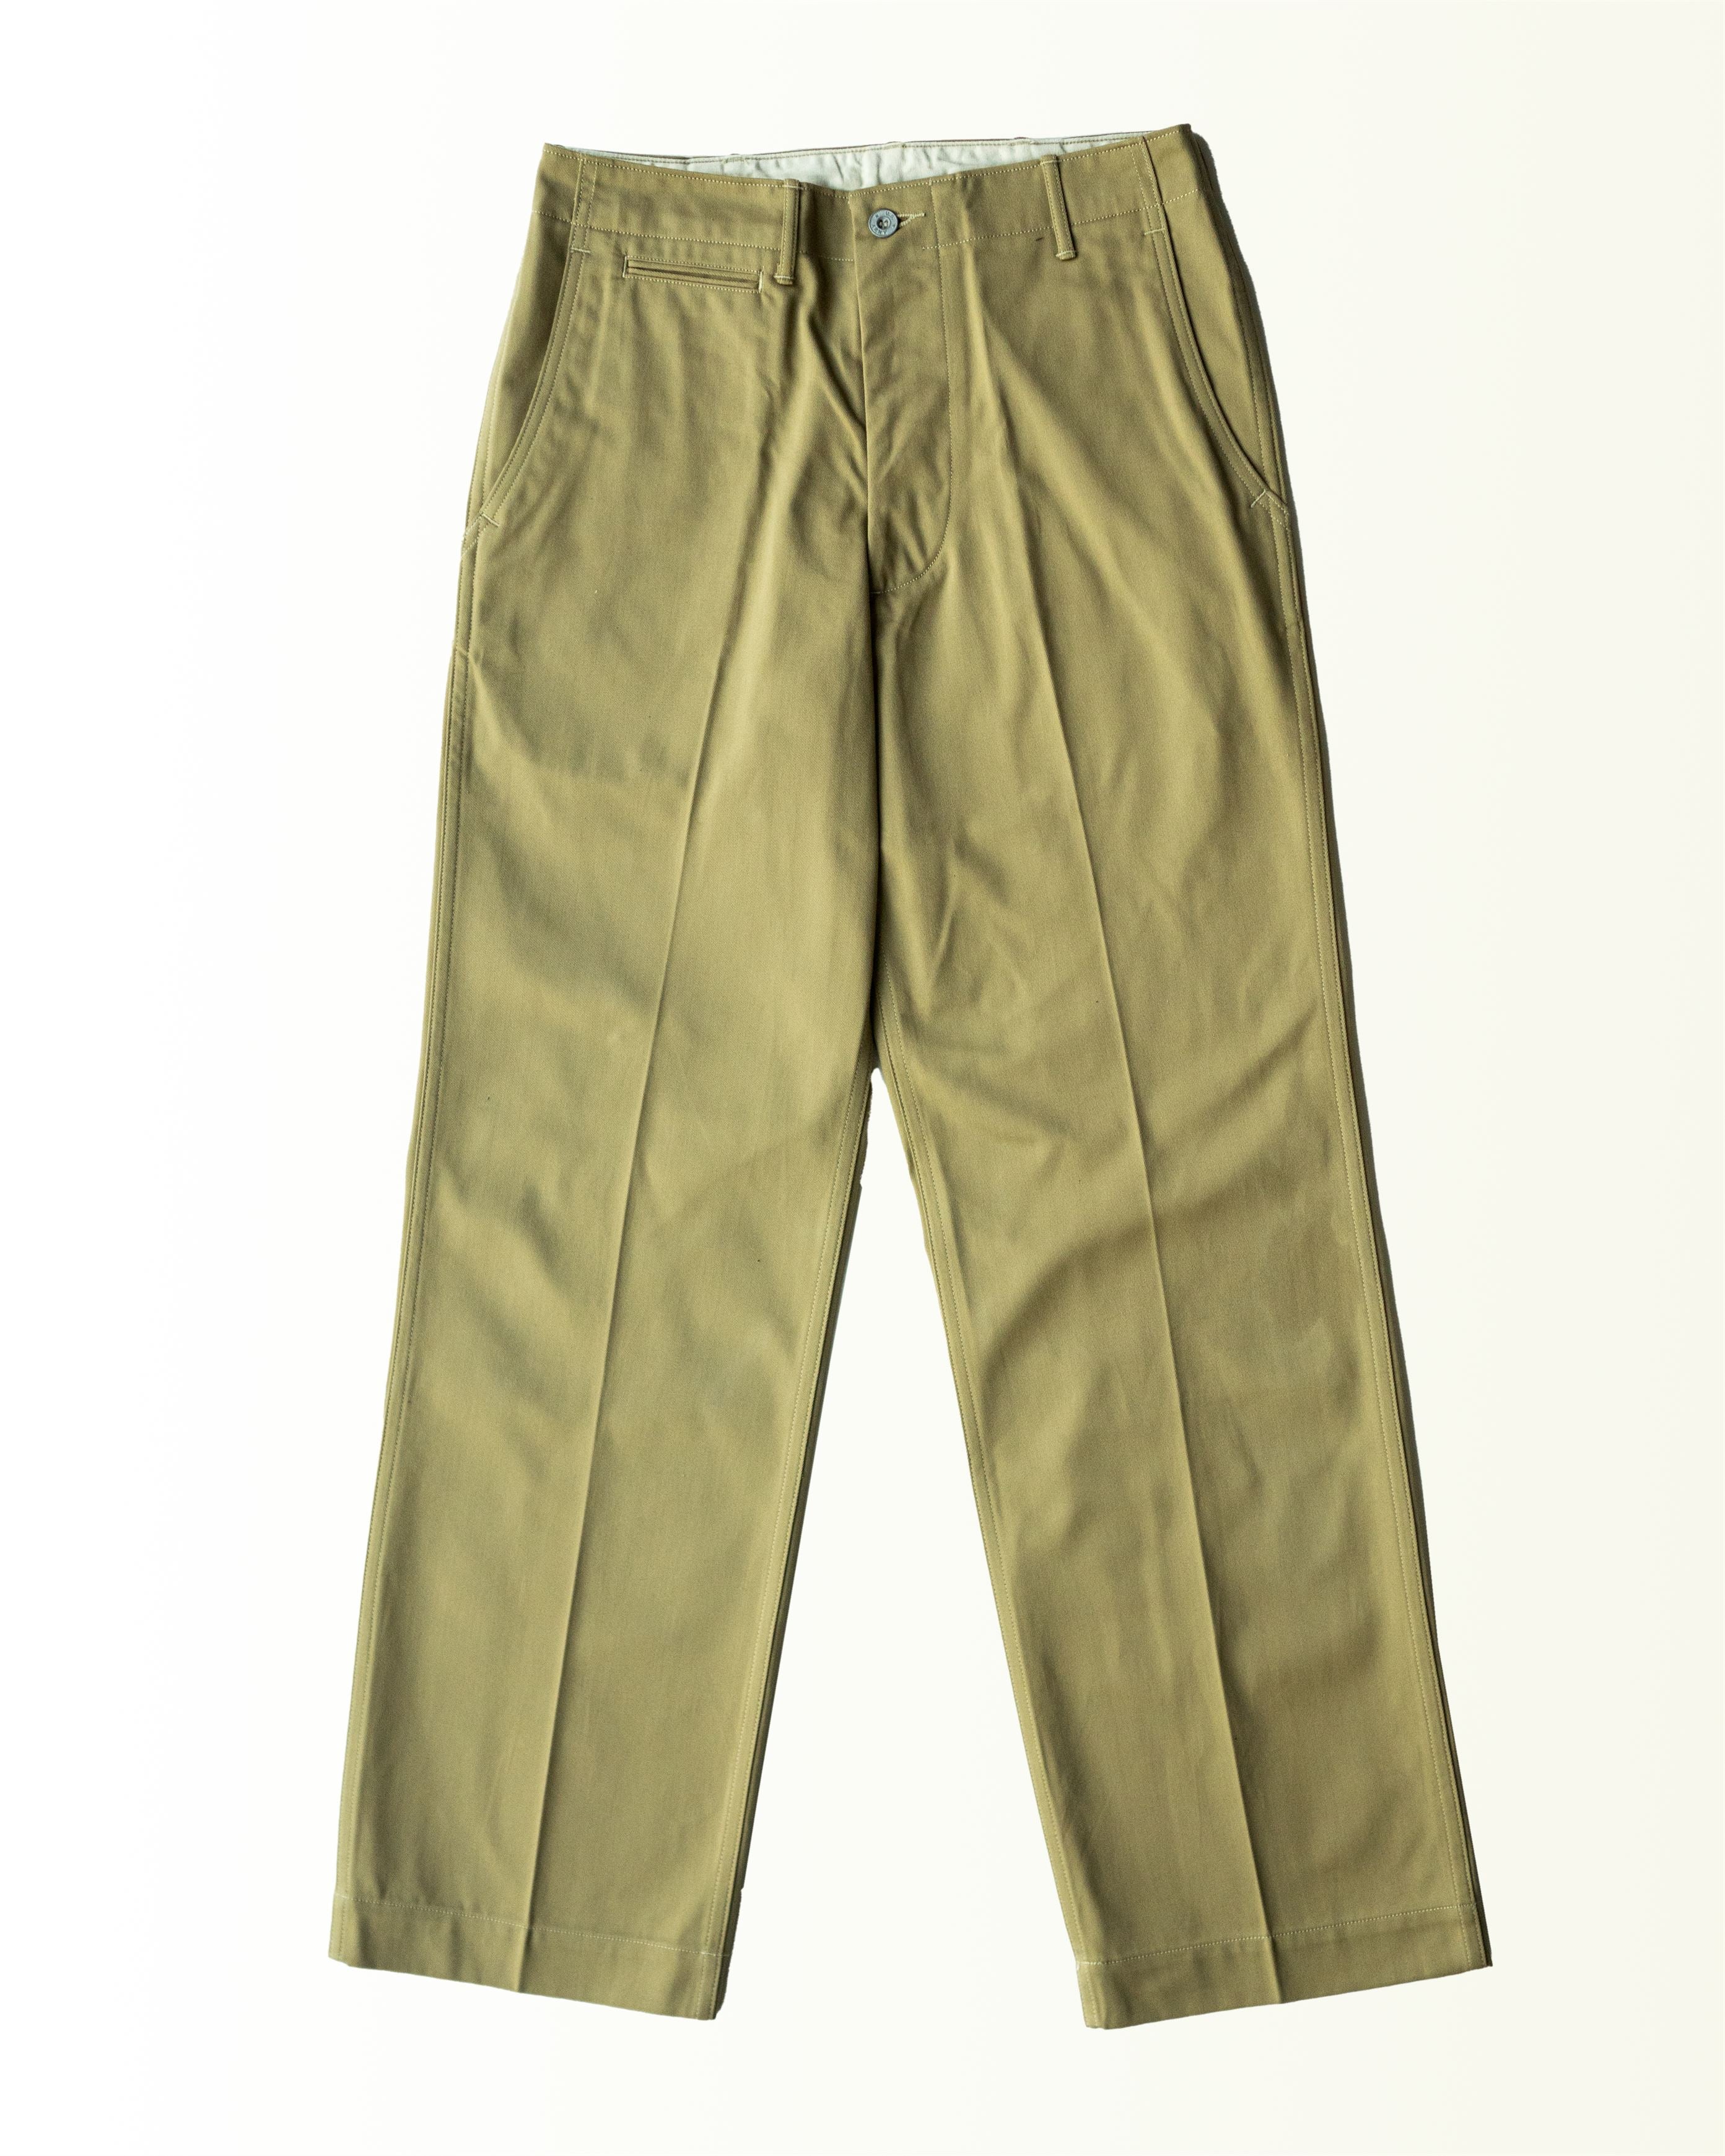 M-41 Type U.S Army Chino Pants | 1216 – The Signet Store